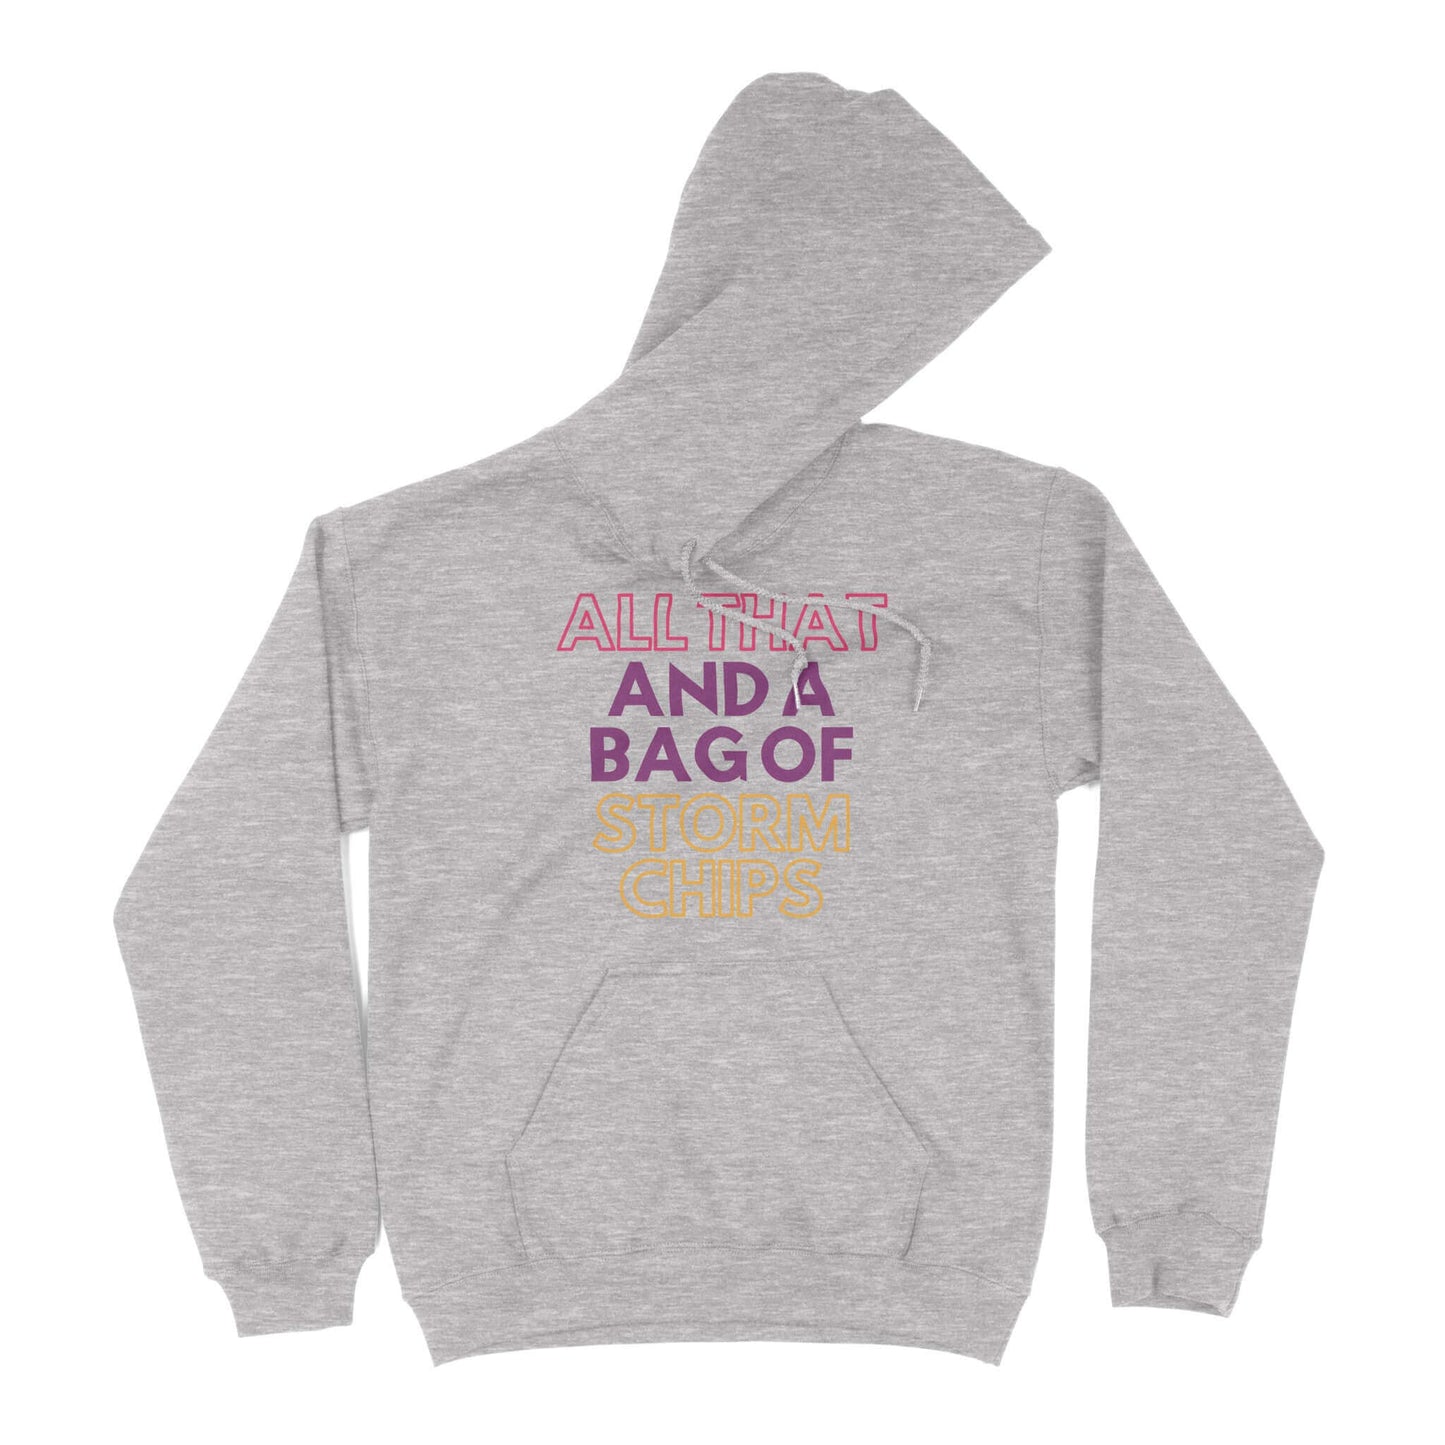 All That and a Bag of Storm Chips Unisex Hoodie in Color: Sport Grey - East Coast AF Apparel